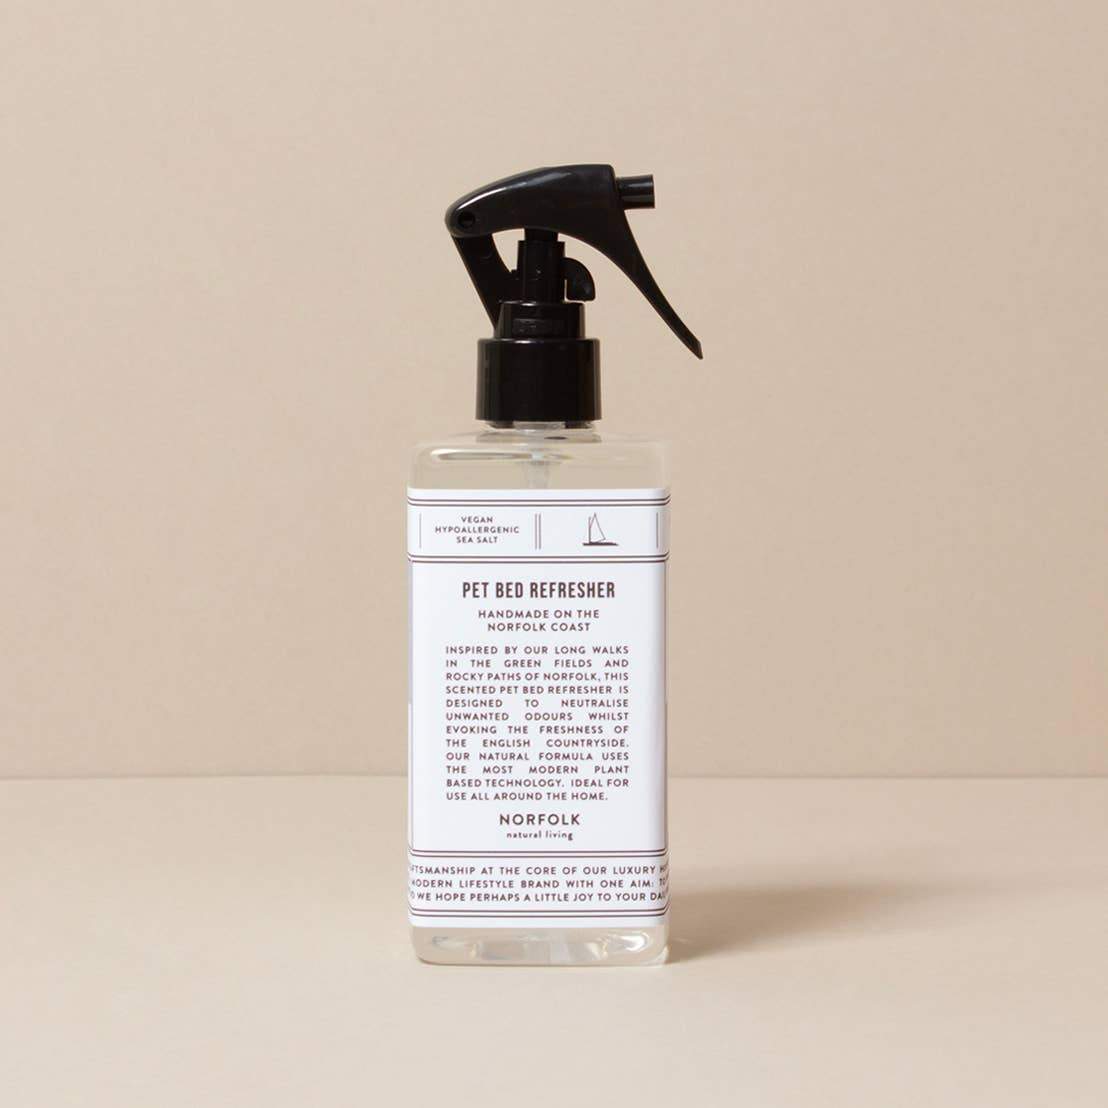 A pump spray bottle of Norfolk Natural Living Rose Garden Pet Bed Refresher against a neutral beige background, with detailed product information labeled on the front.